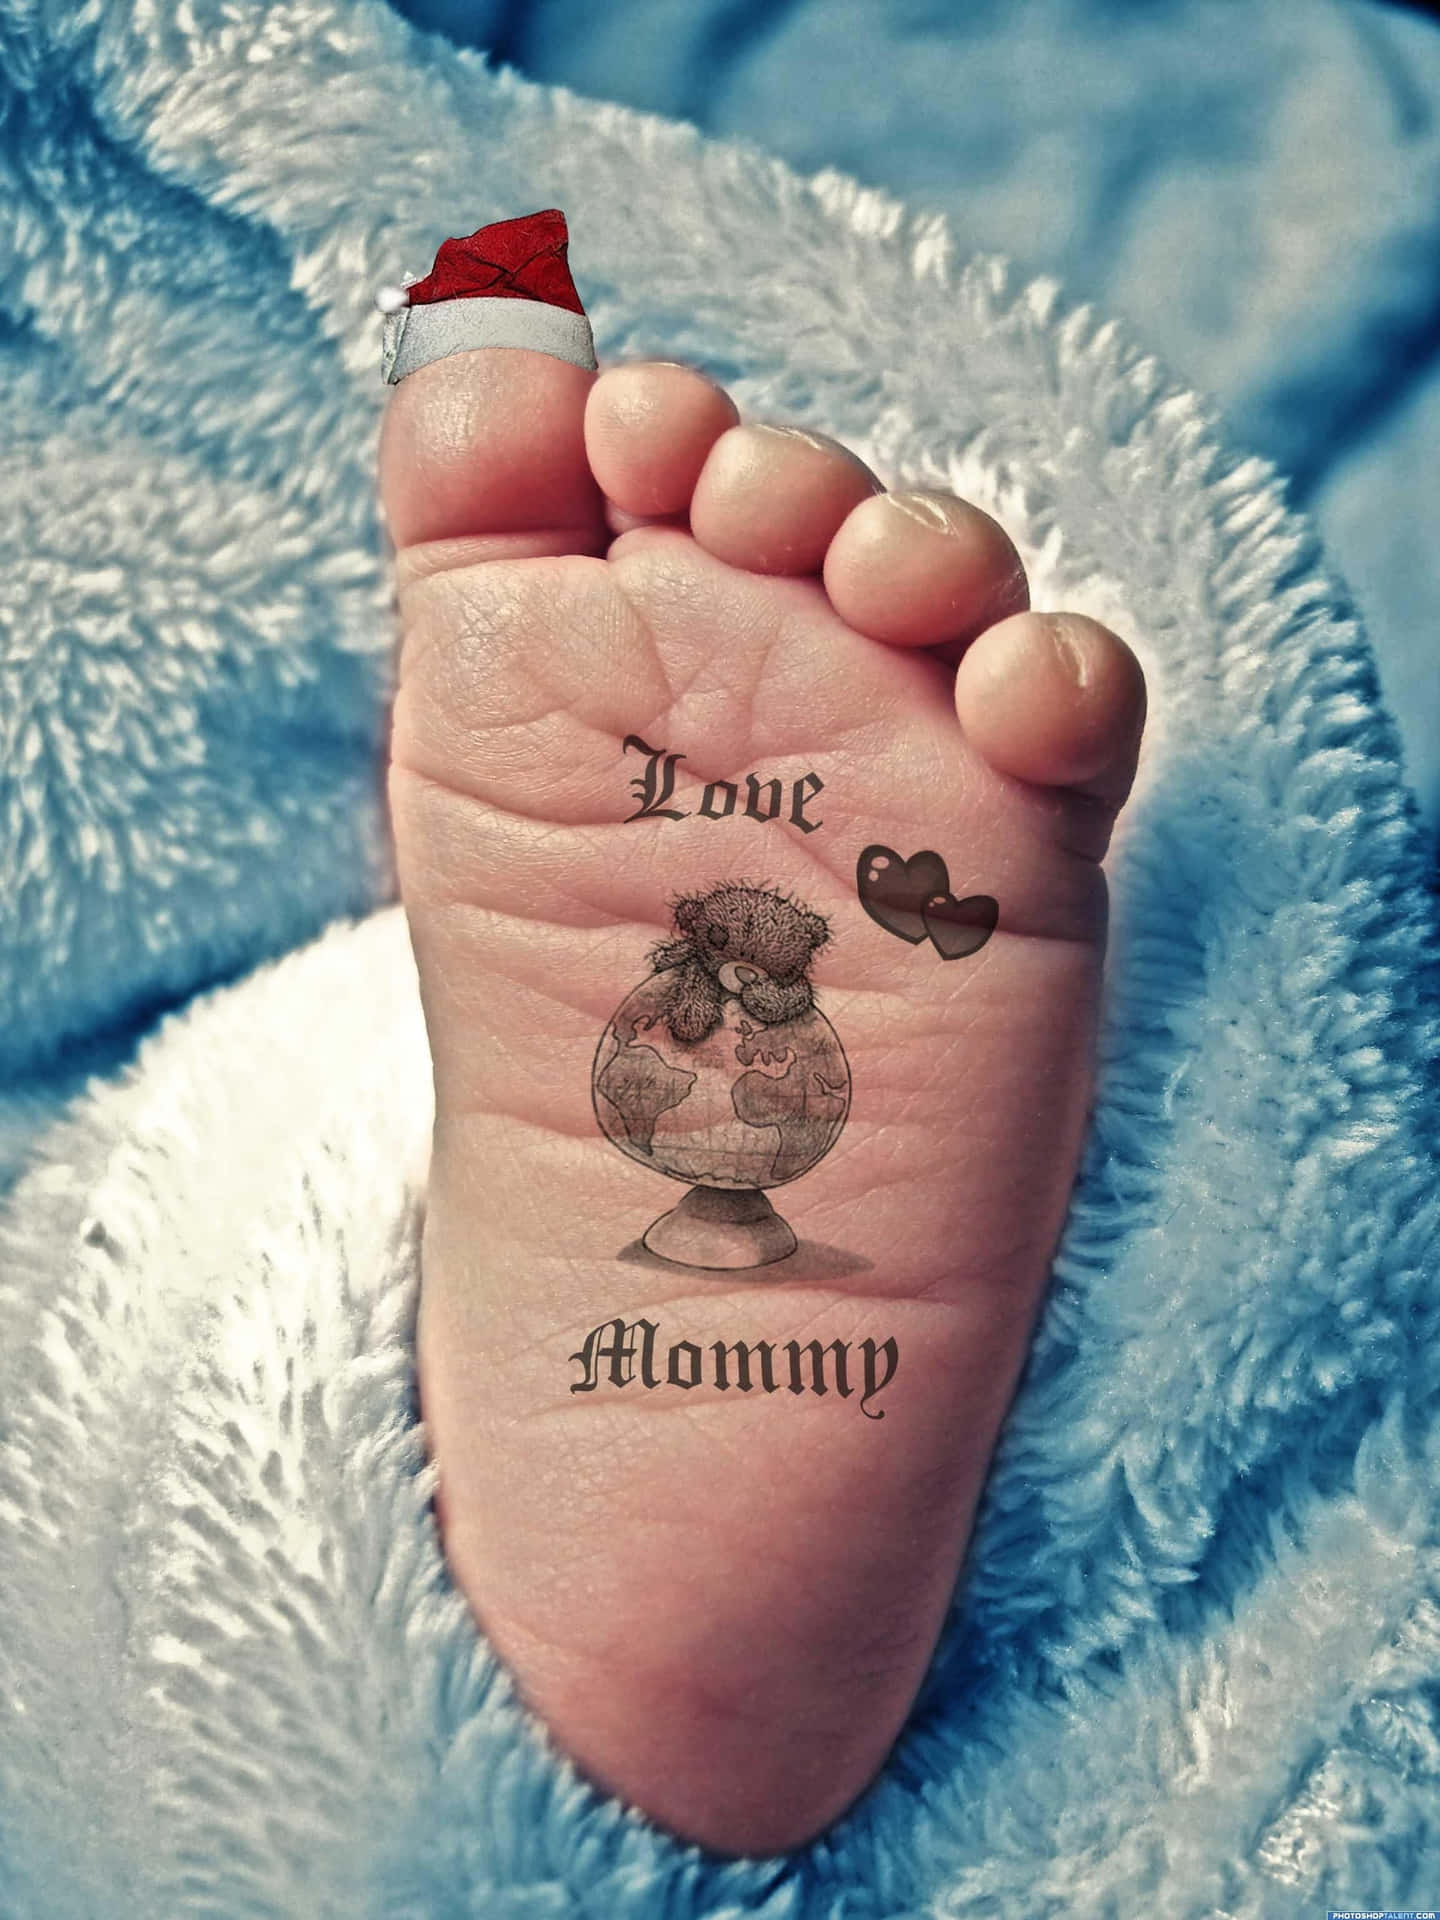 A Baby's Foot With A Santa Hat On It